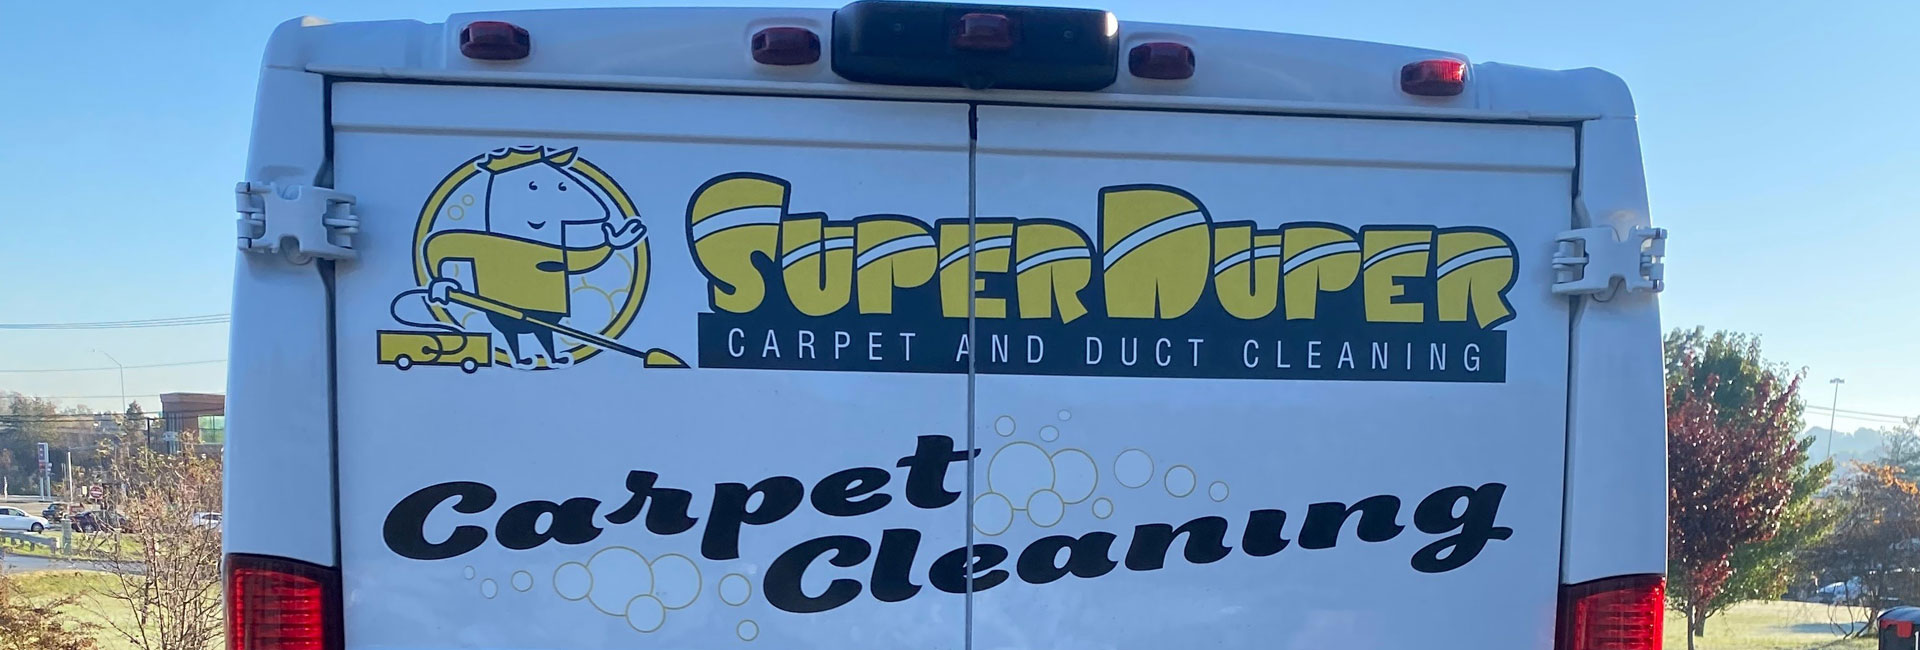 Super Duper Carpet & Duct Cleaning - contact